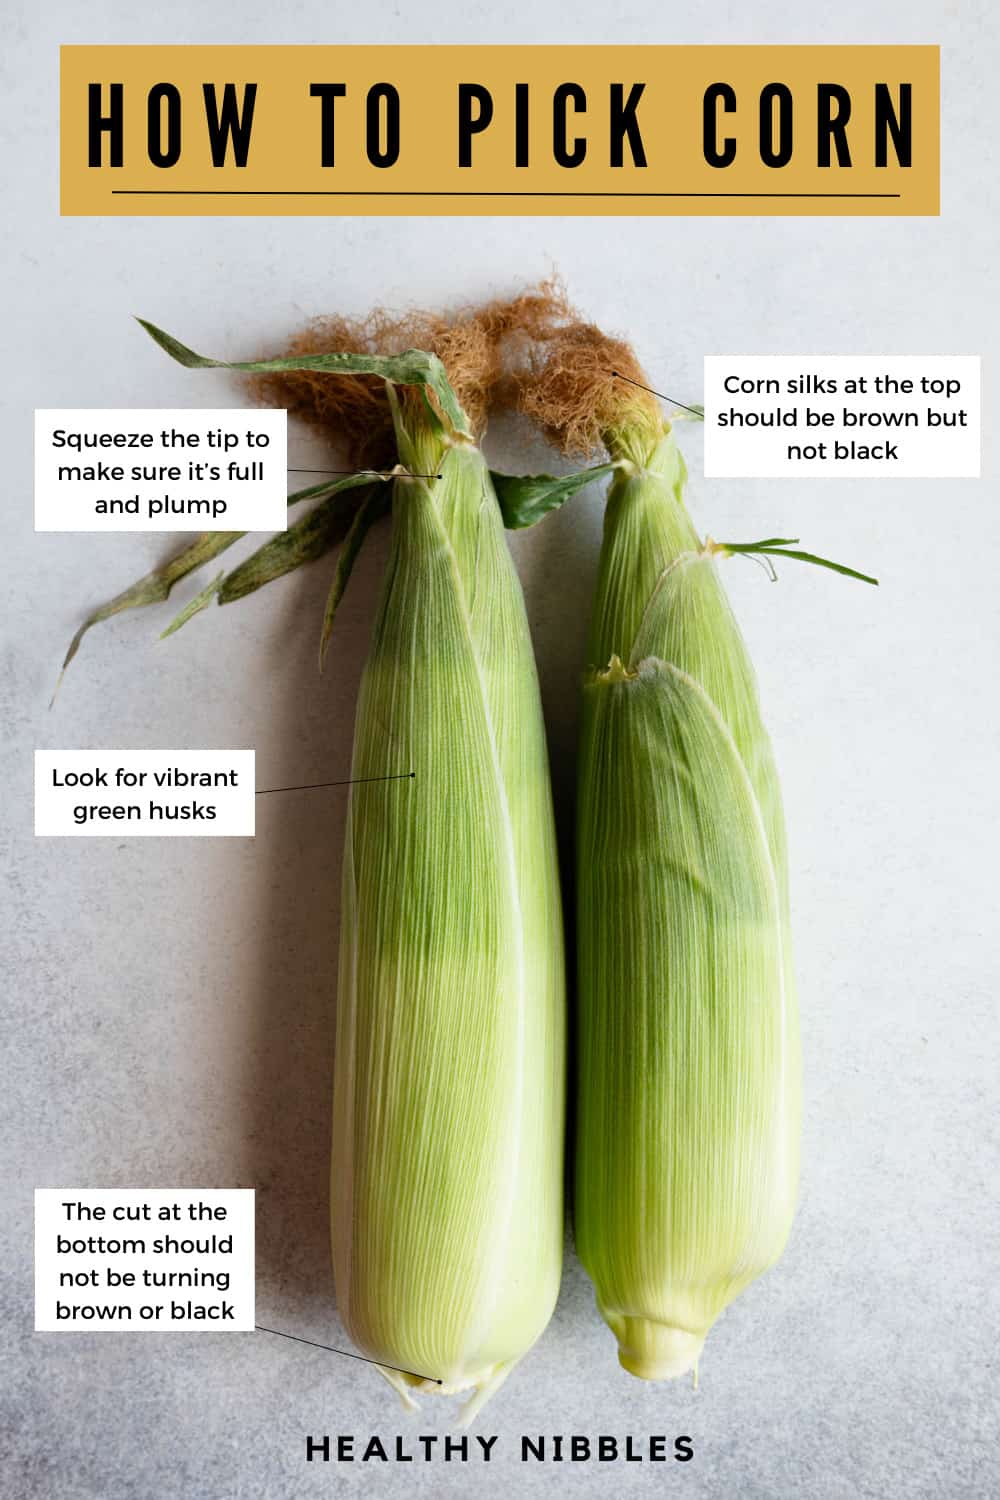 Infographic with tips on who to pick corn